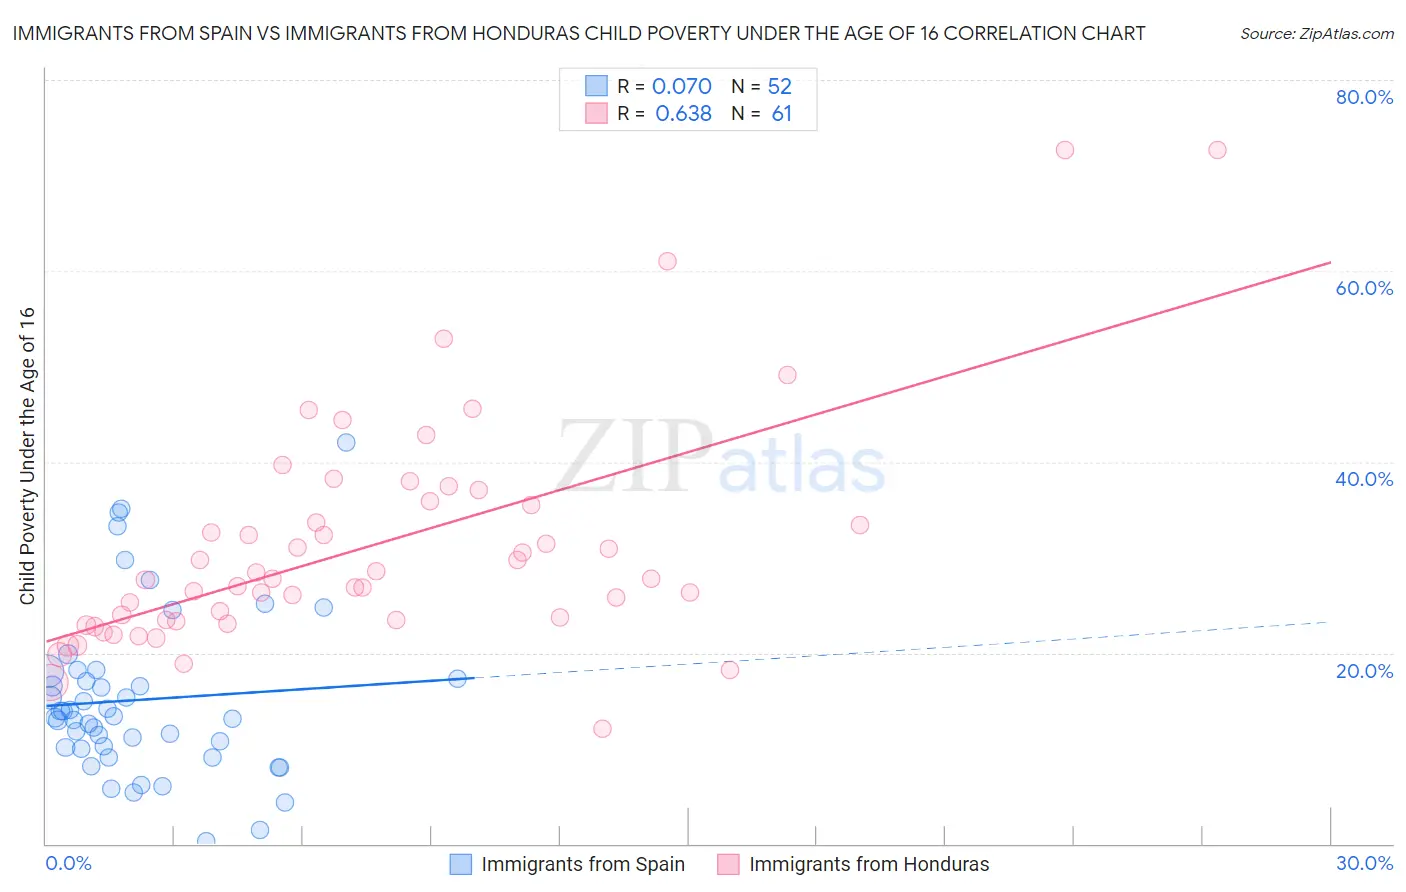 Immigrants from Spain vs Immigrants from Honduras Child Poverty Under the Age of 16